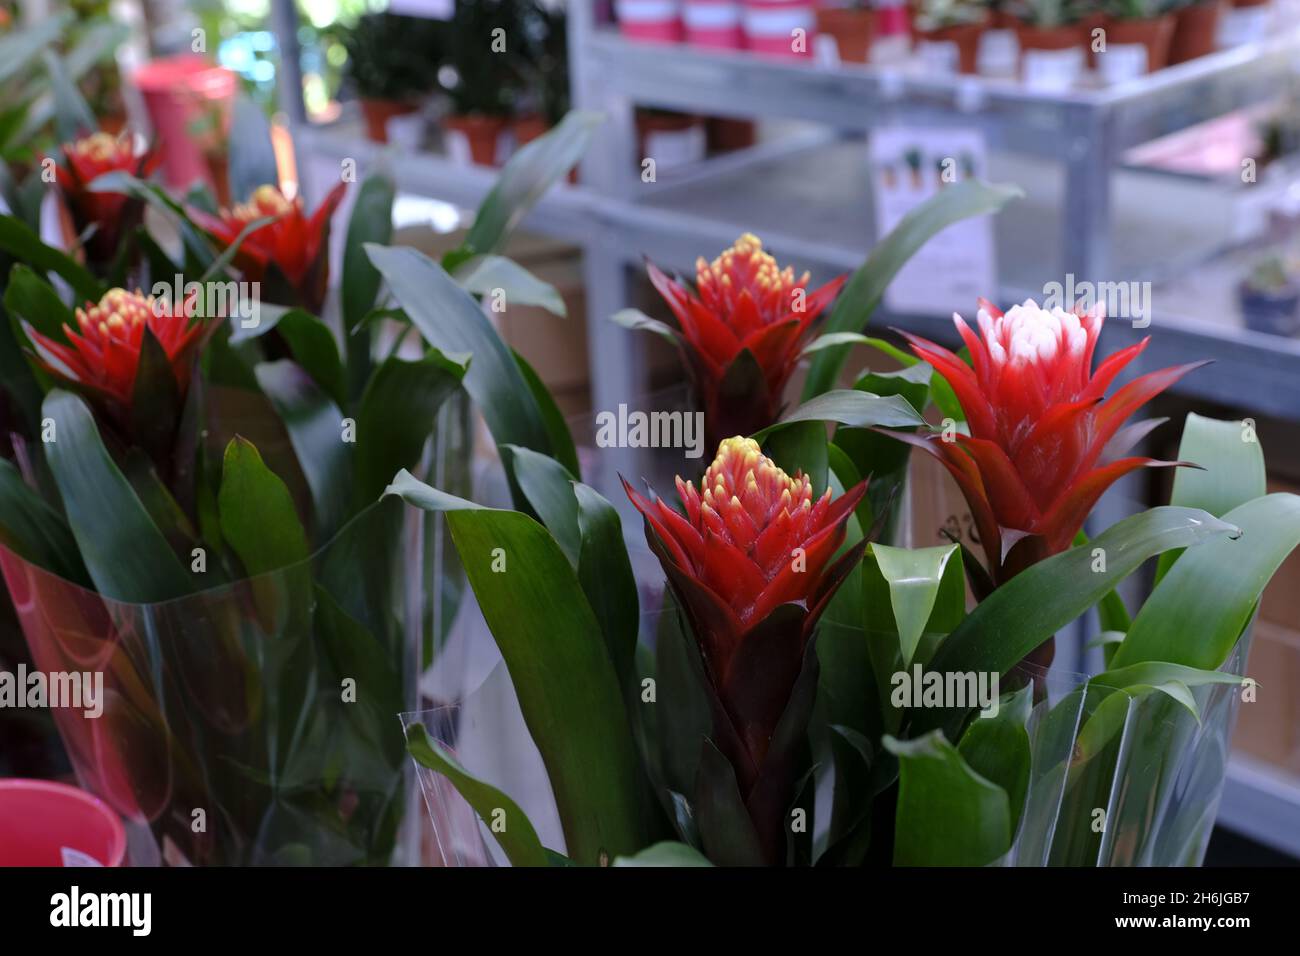 Bromelia Guzmania, flower with red petals and green leaves. Family Bromeliaceae. Sale in store Stock Photo